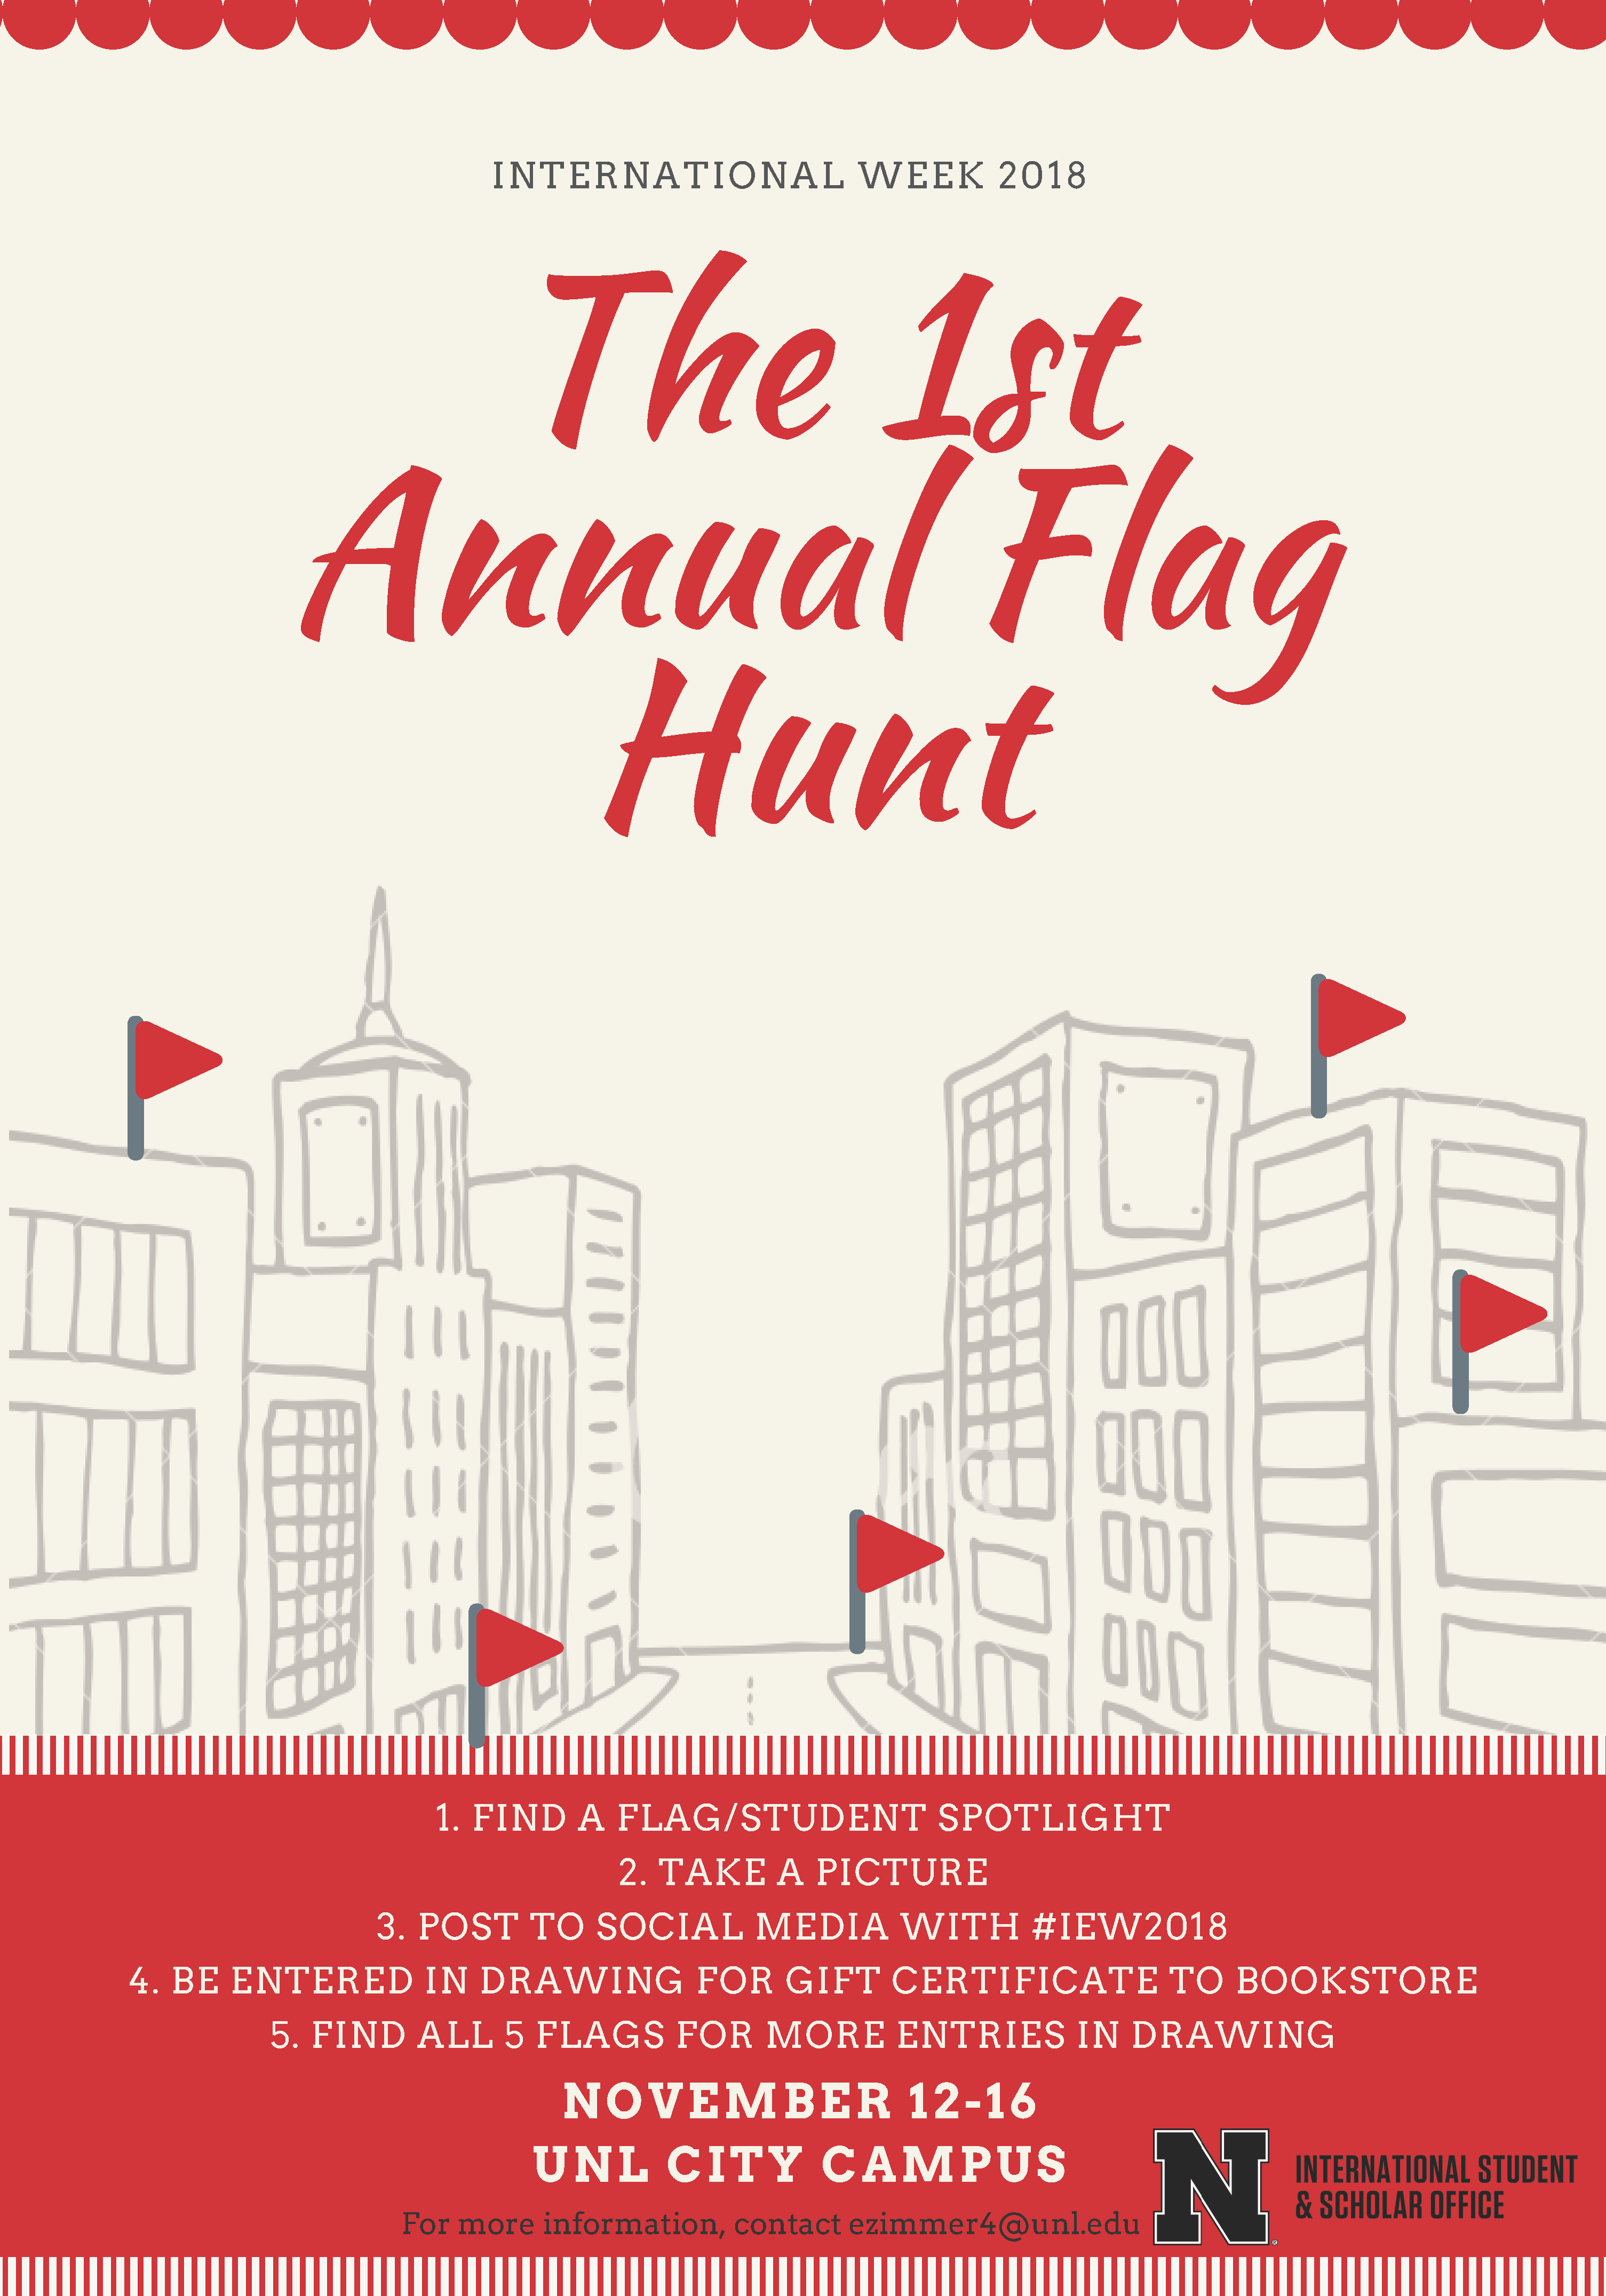 The first annual Flag Hunt will celebrate the rich diversity of UNL’s students during International Education Week.